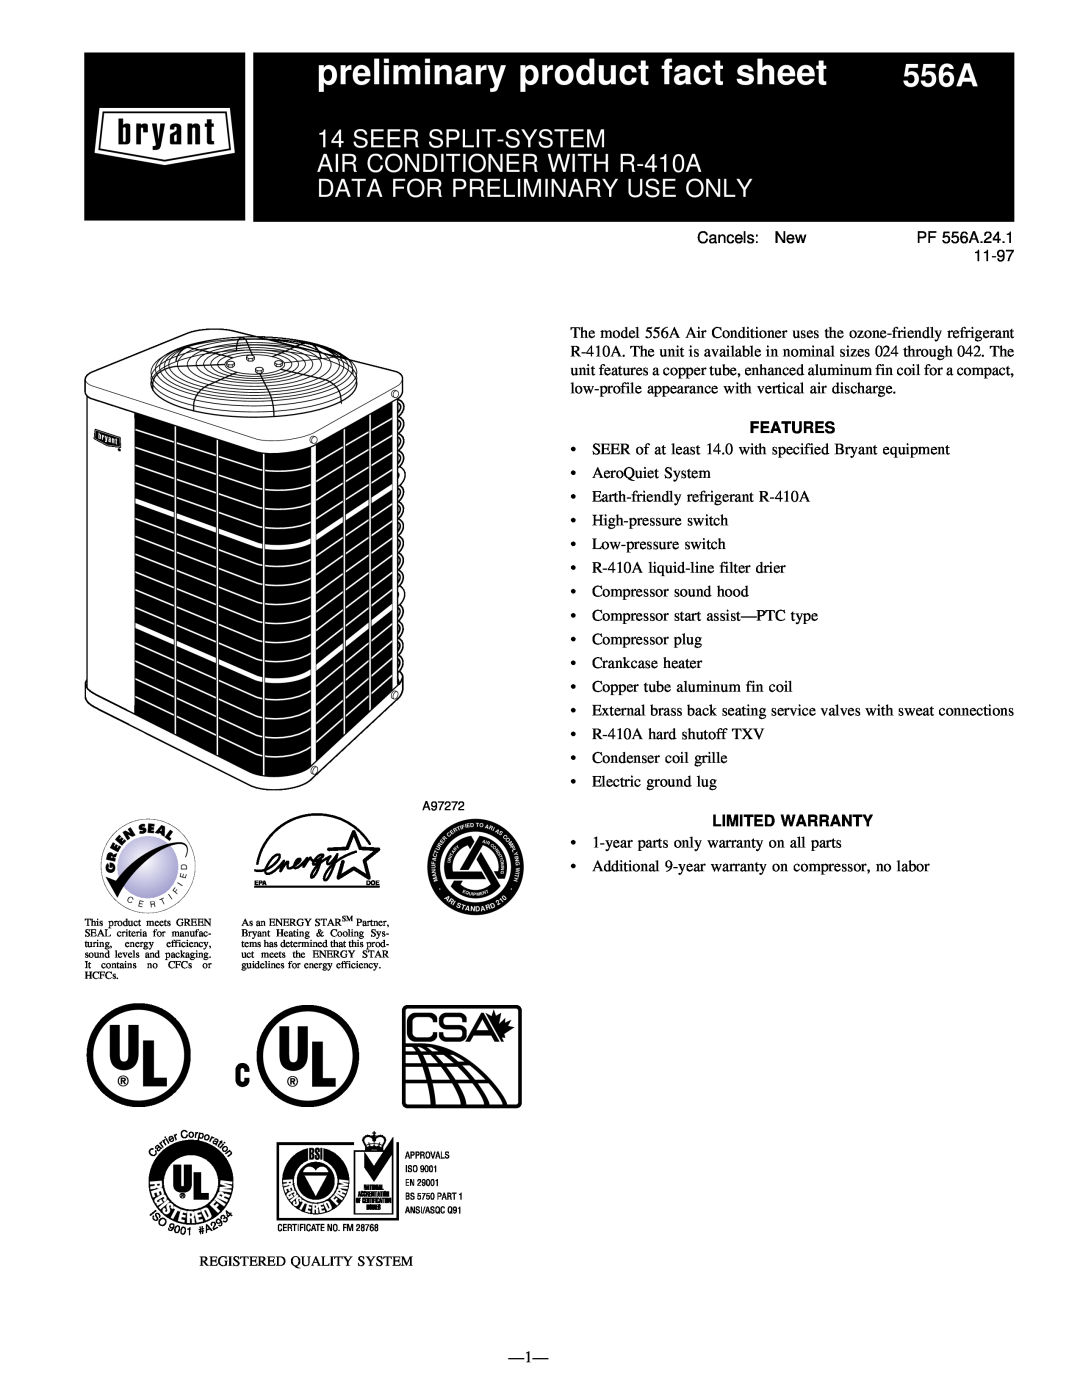 Bryant instruction manual Safety Considerations, Installation Recommendations, Models550A, 552A, and 556A 